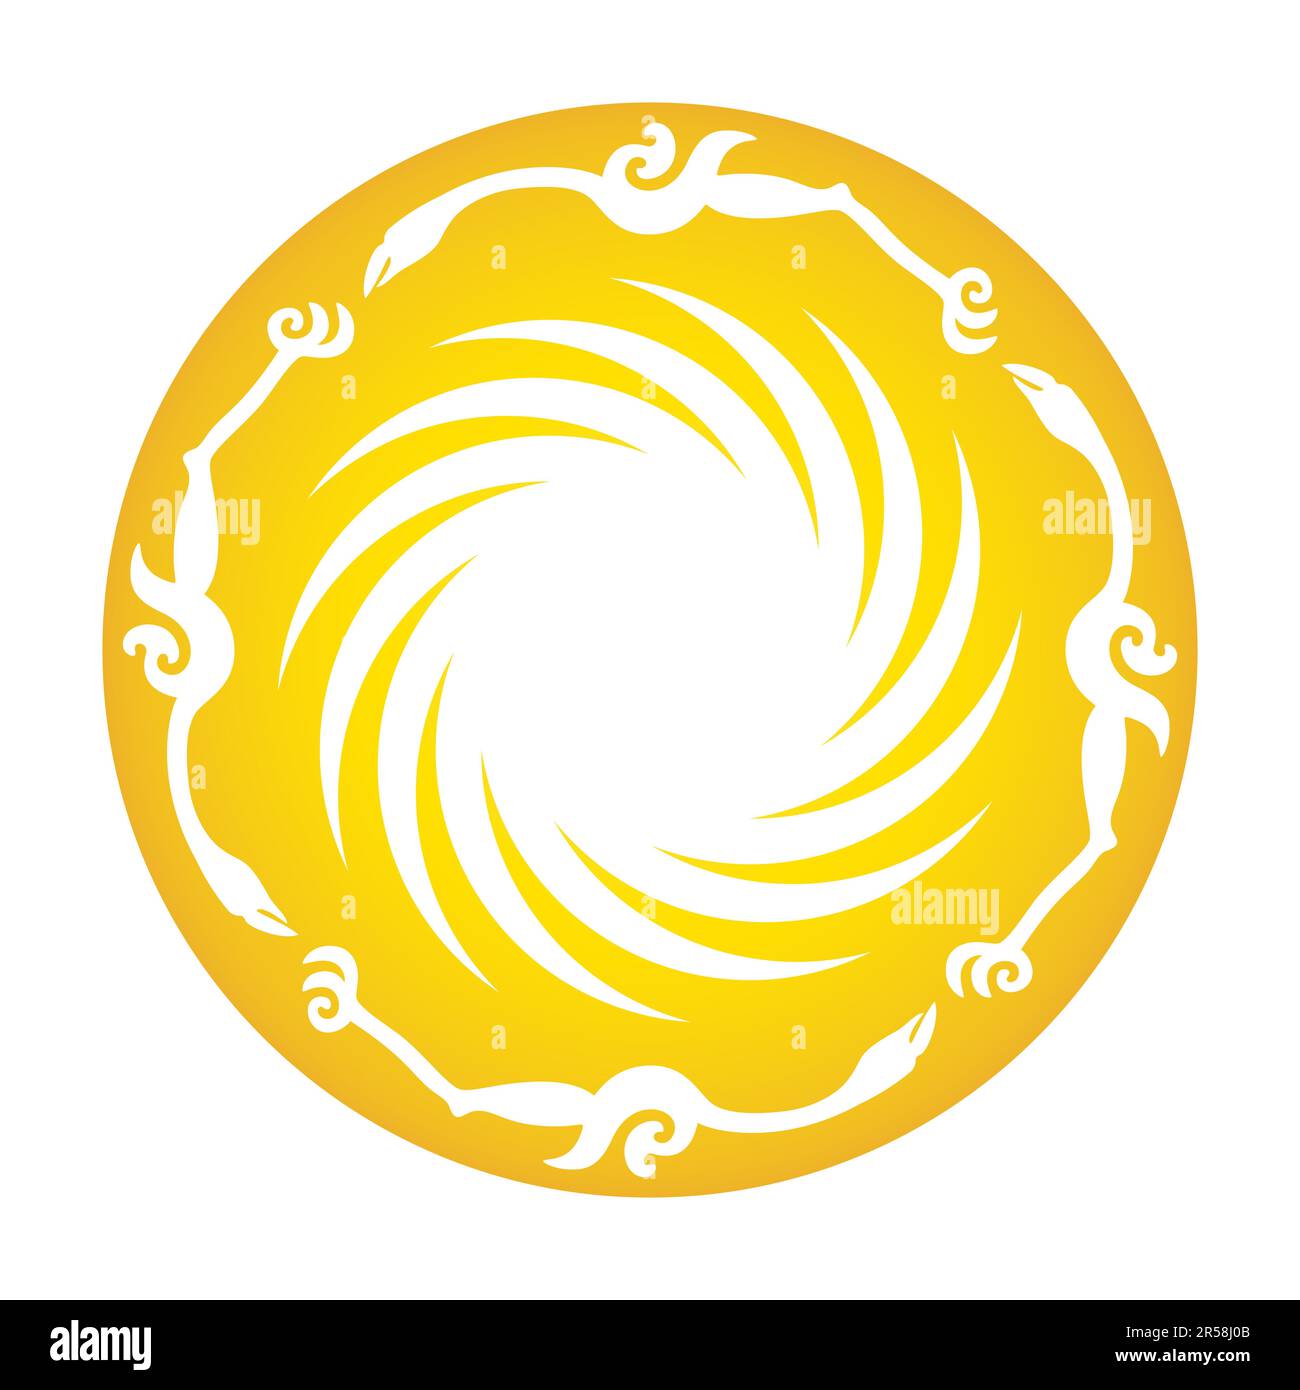 Golden Sun Bird, or the Sun and Immortal Birds Gold Ornament. Ancient Chinese gold pattern. Four birds flying around a twelve-pointed sun pattern. Stock Photo